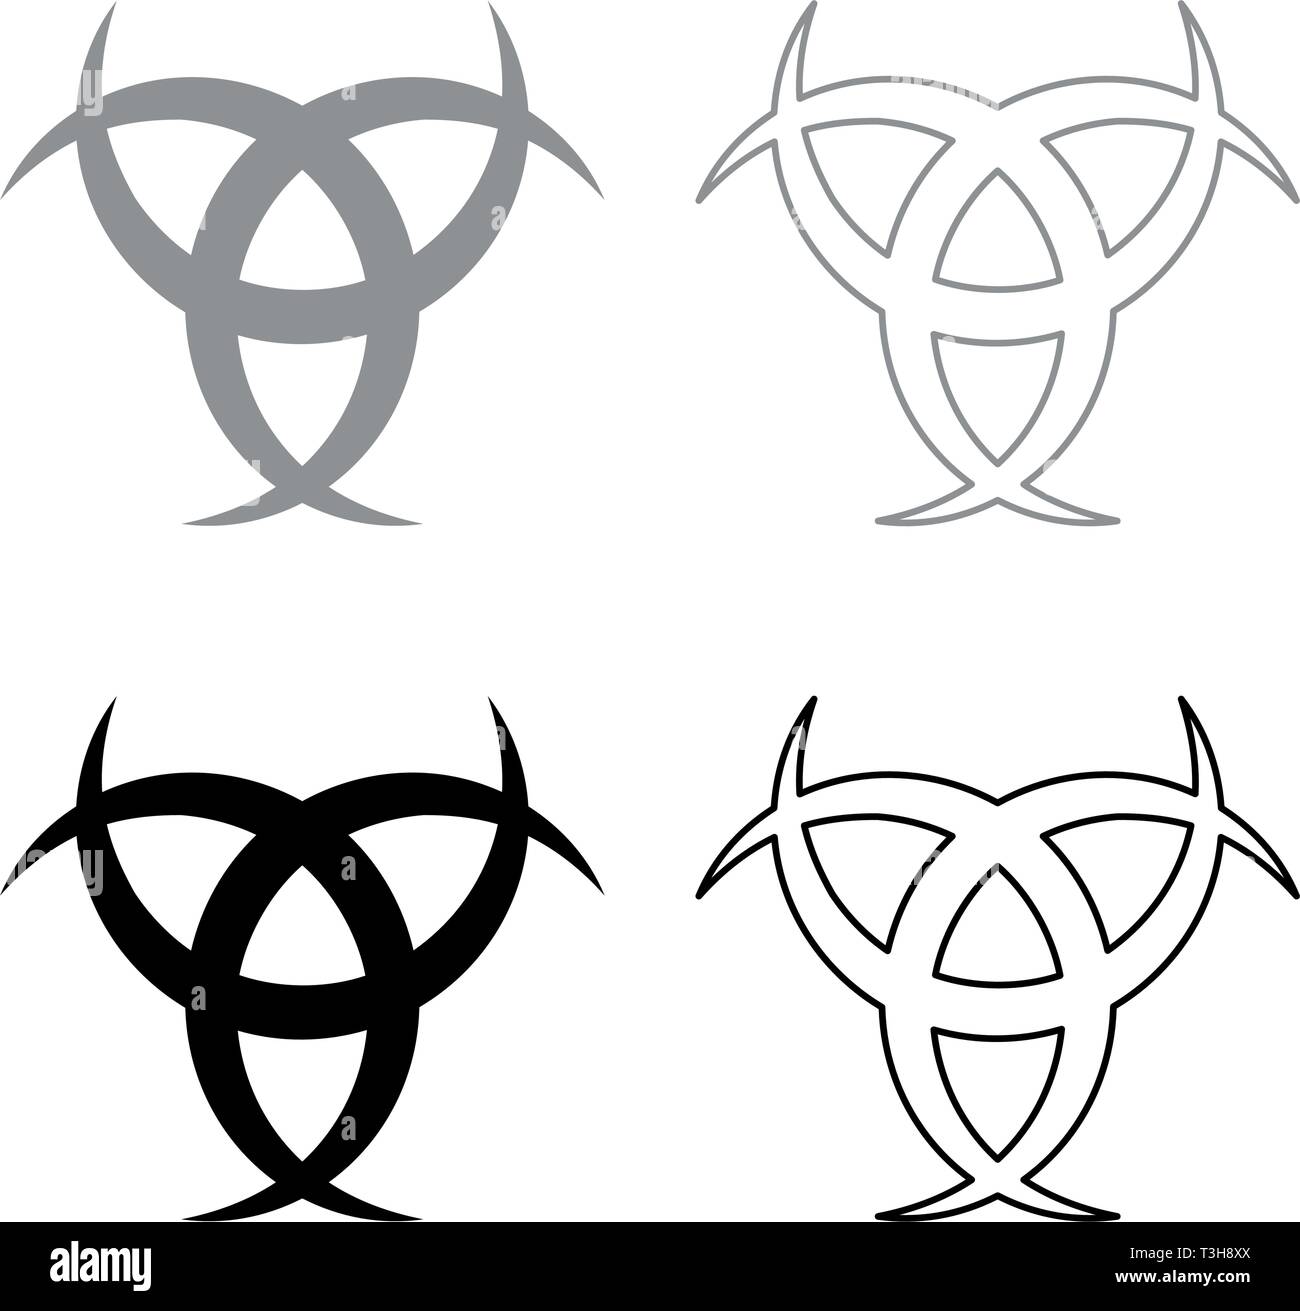 Horn Odin Triple horn of Odin icon set black grey color vector illustration flat style simple image Stock Vector